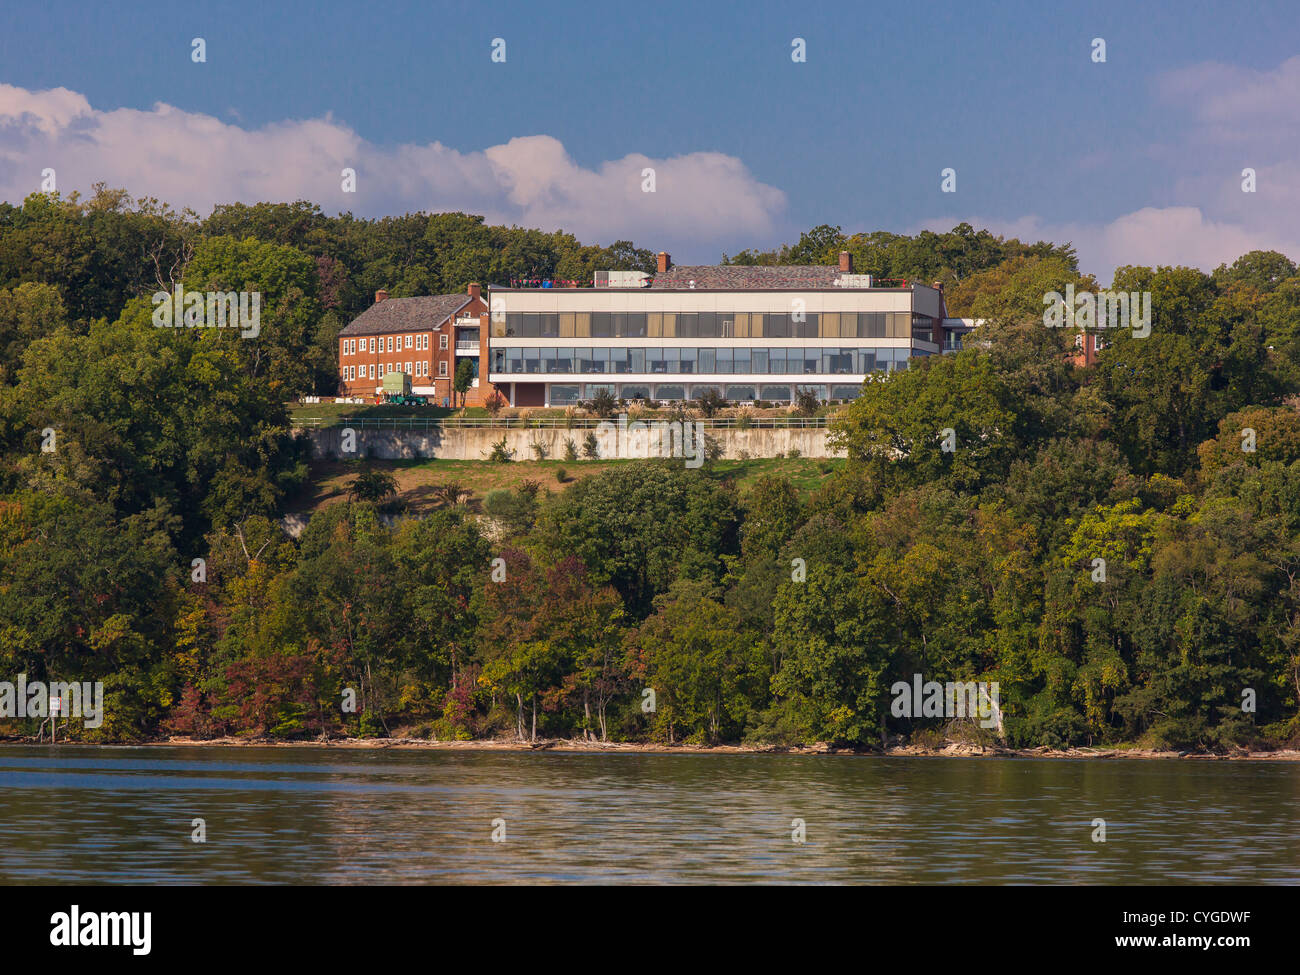 FORT BELVOIR, VIRGINIA, USA - Fort Belvoir Officers' Club on the Potomac River. Stock Photo